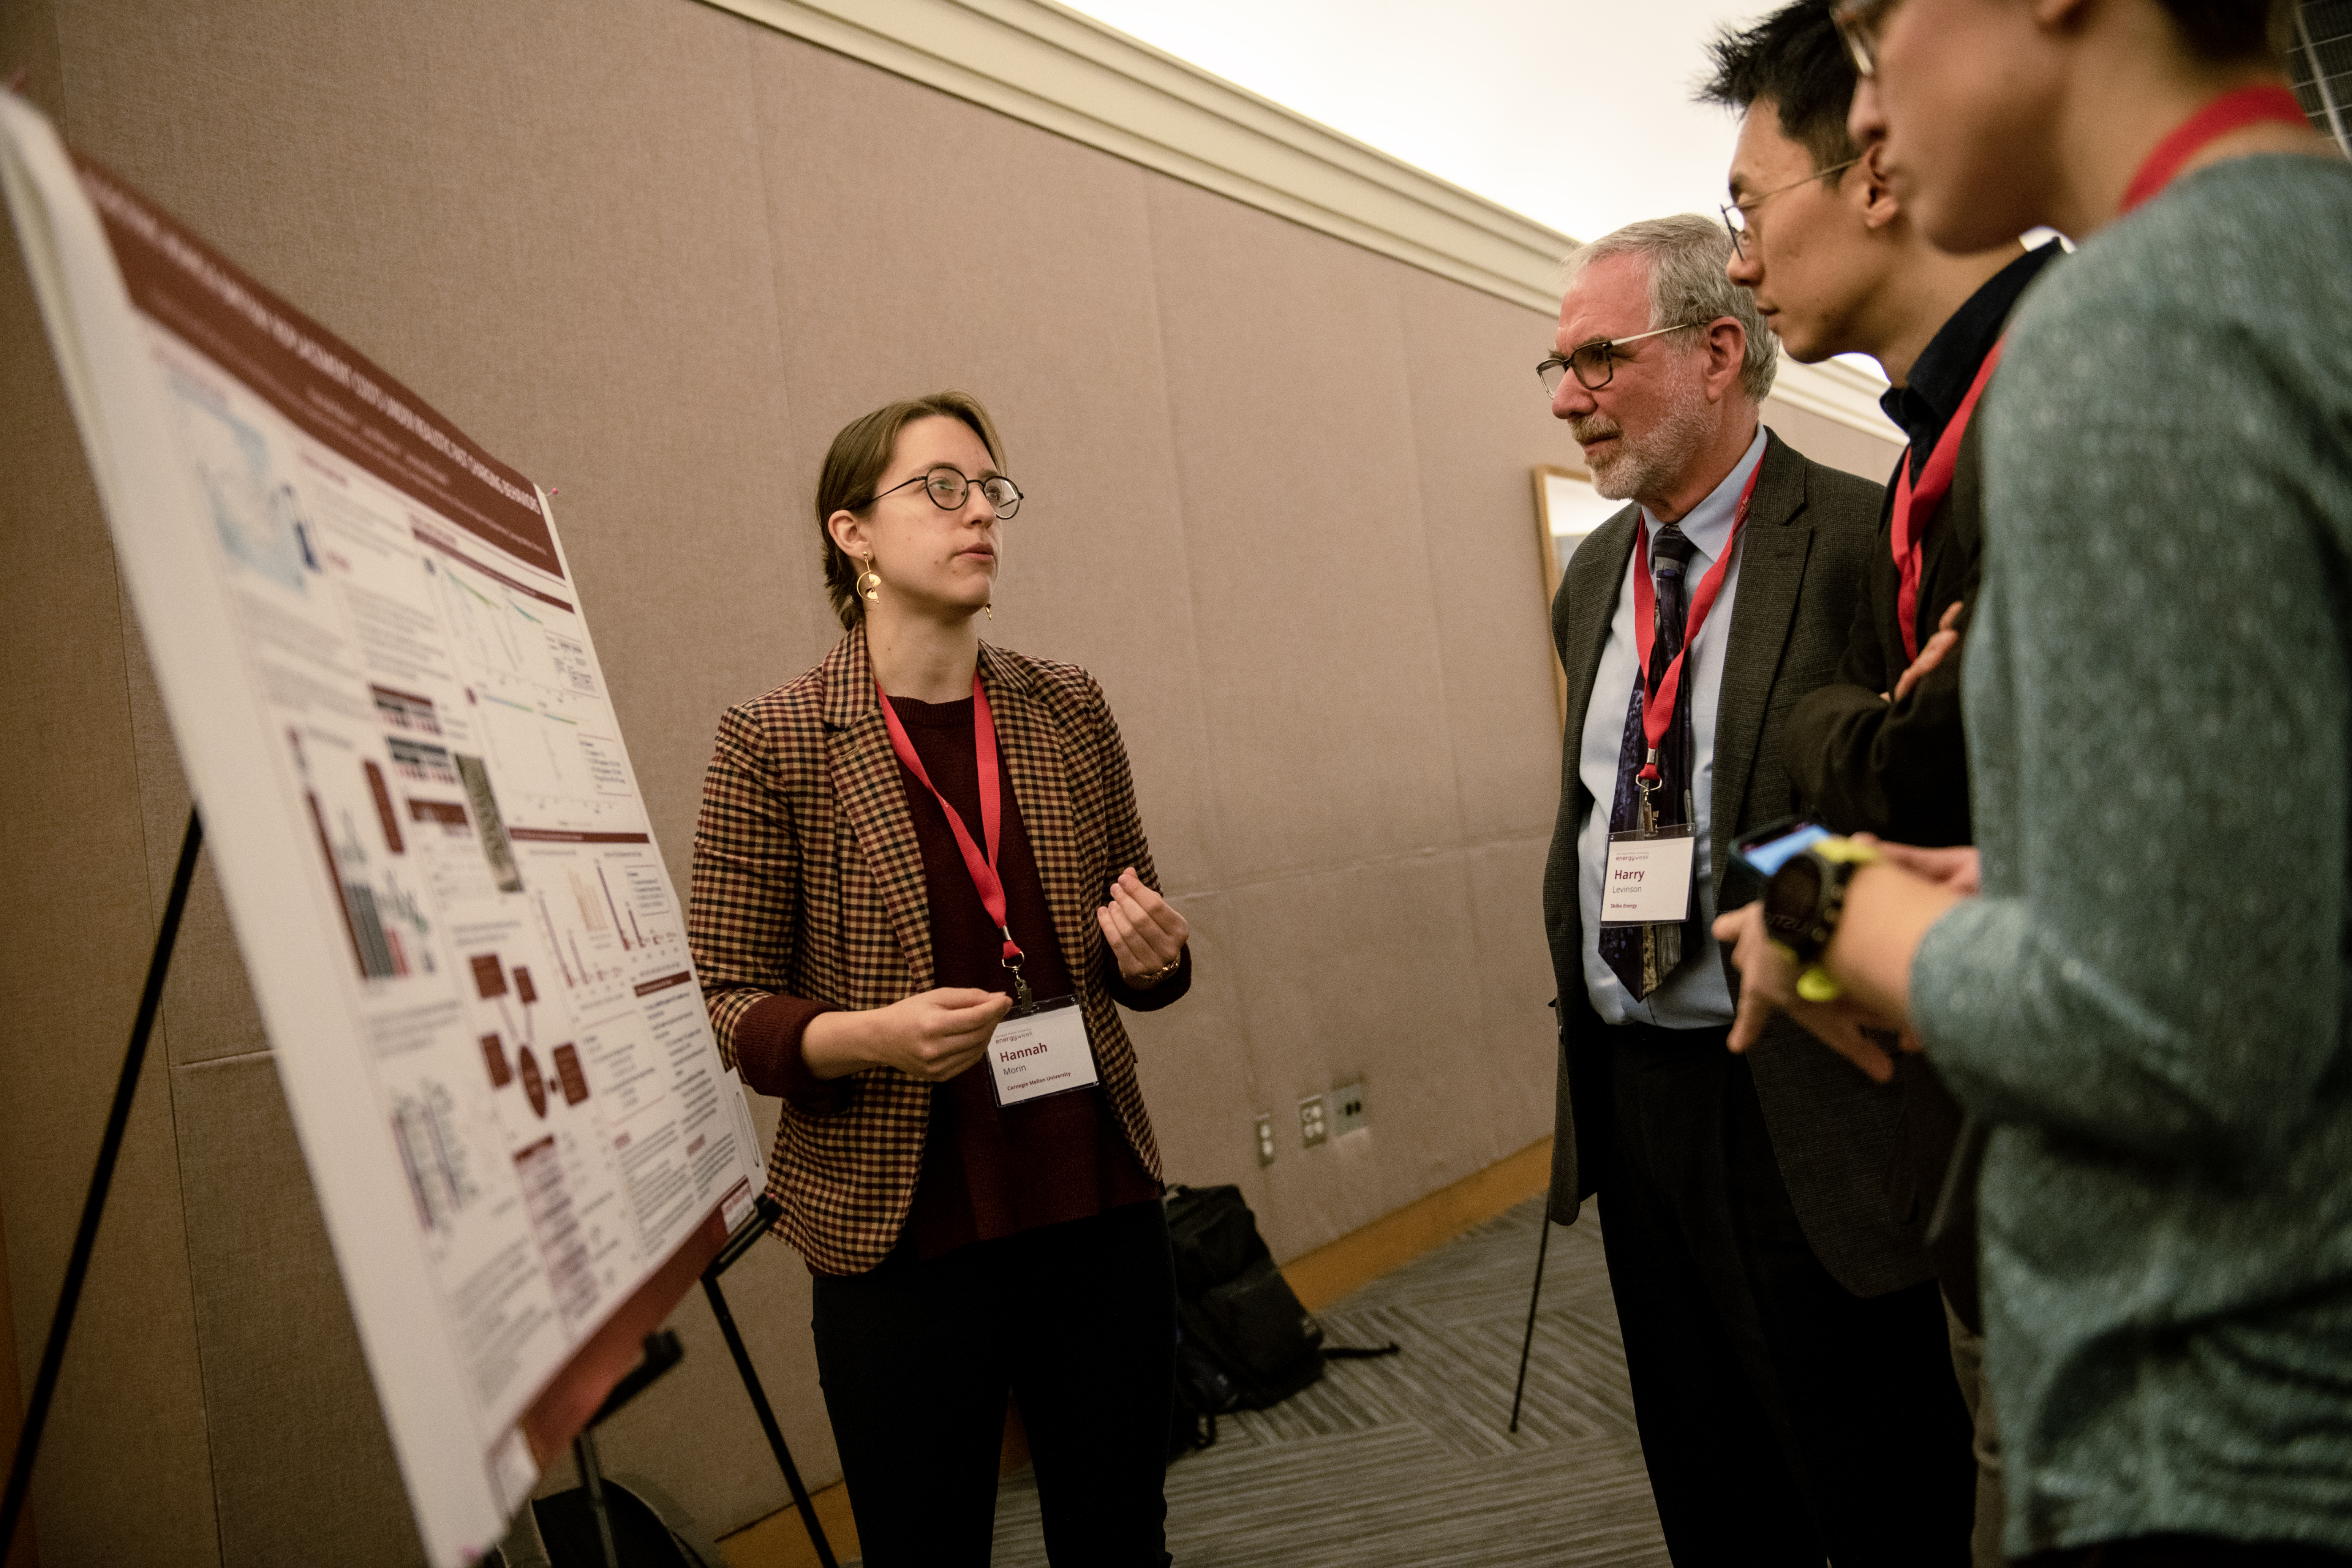 Student Presents Poster to Judges in Cohon Center